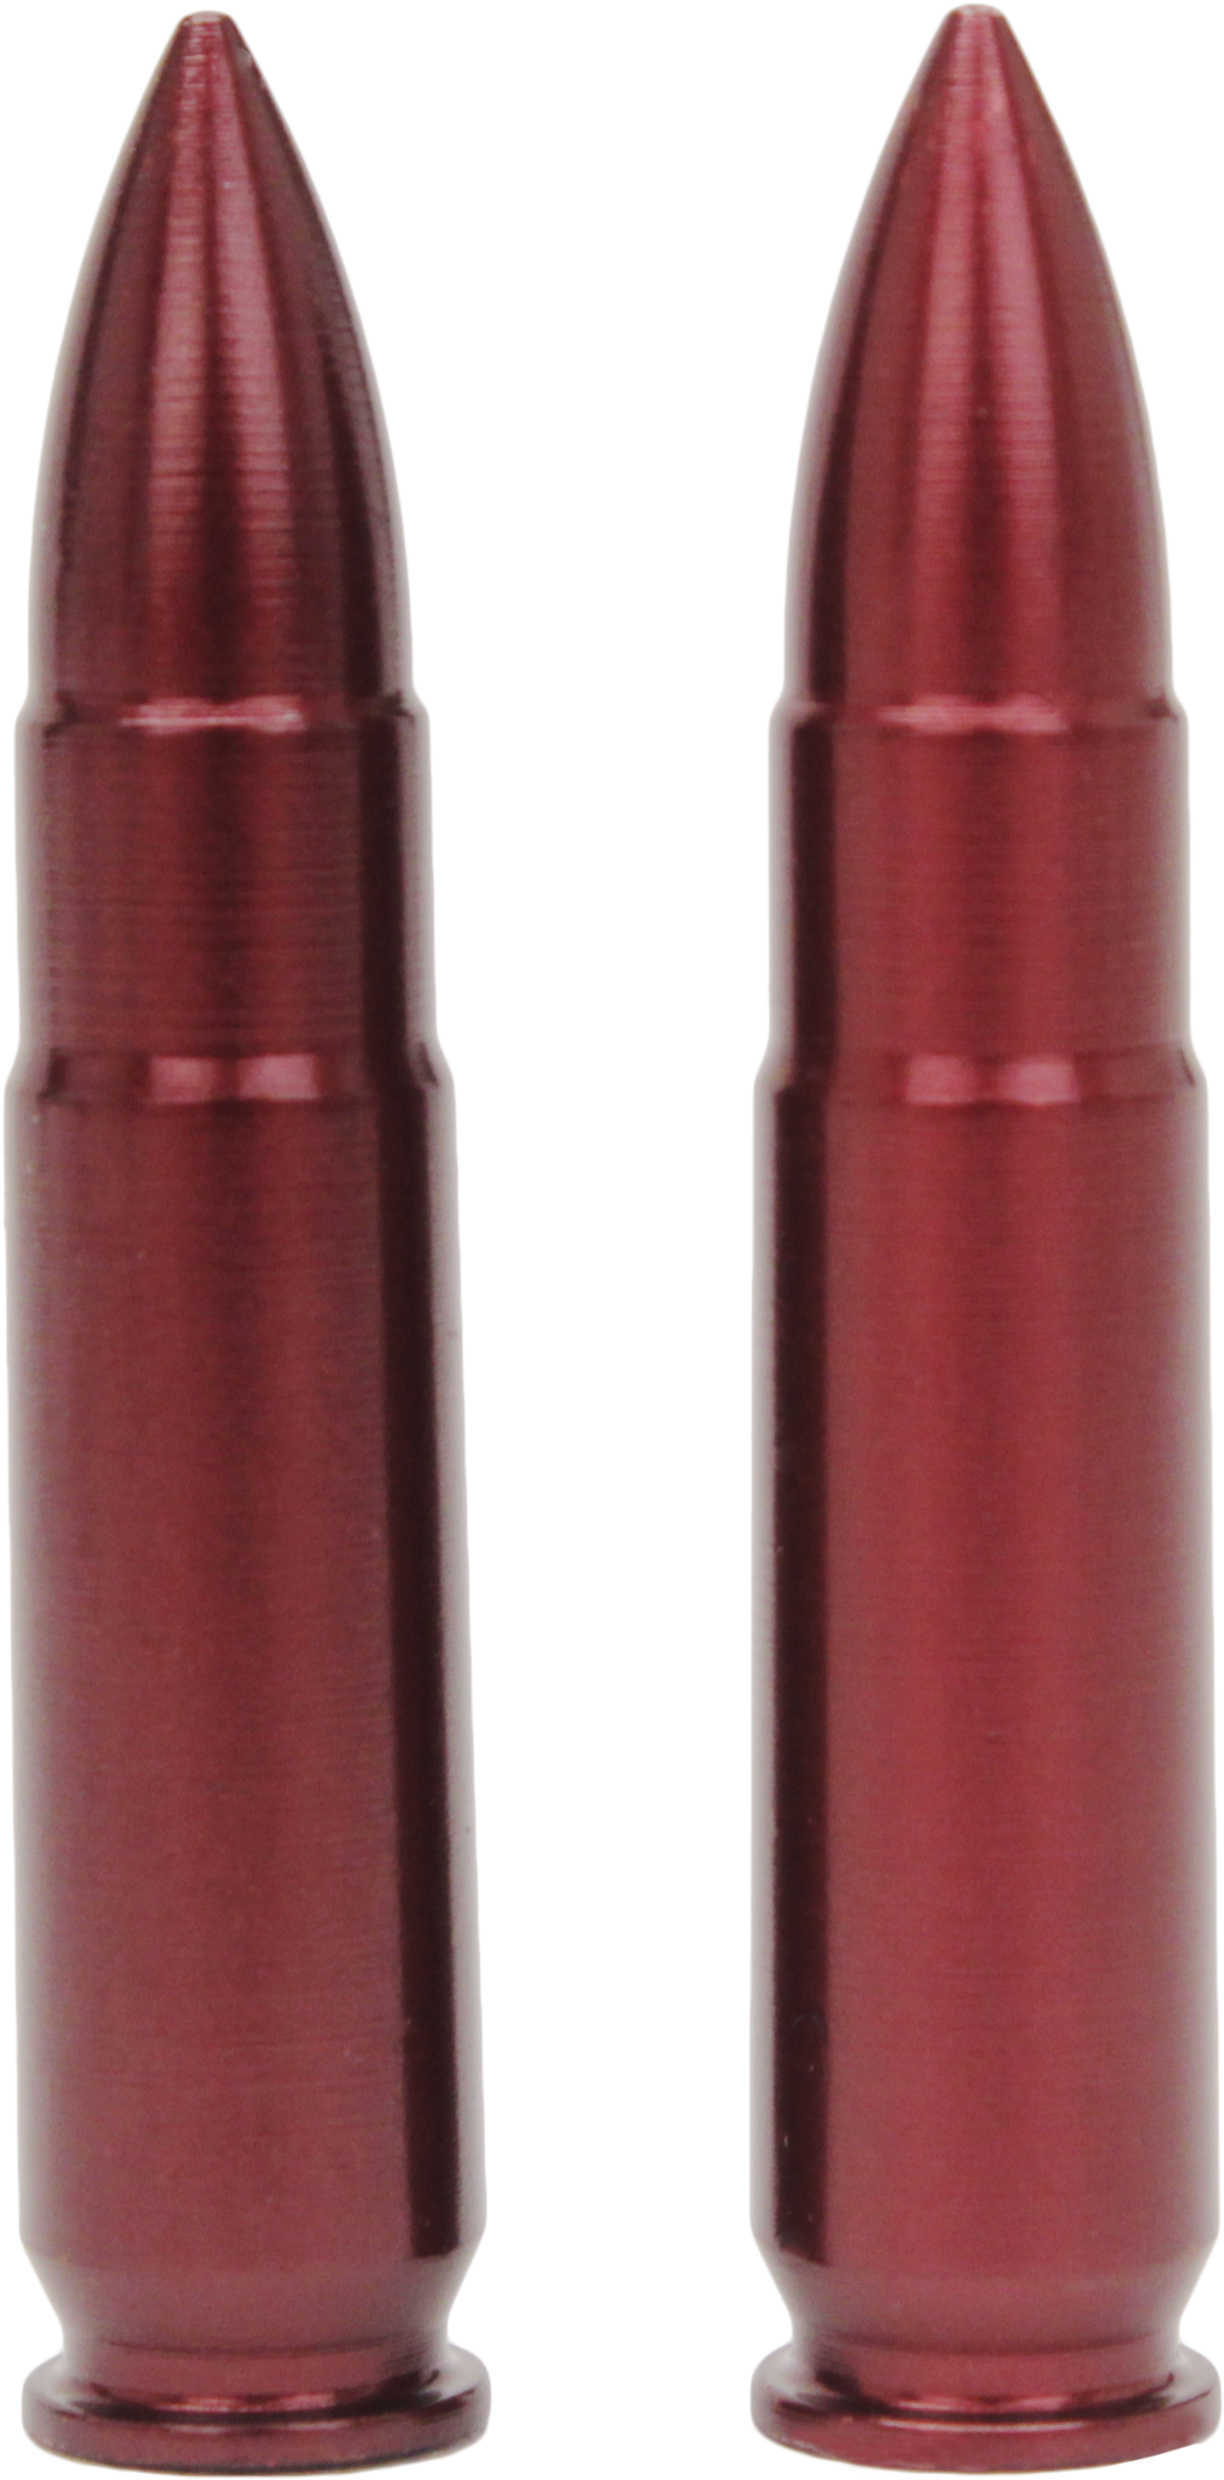 Pachmayr A-Zoom Snap Caps Rifle 300 AAC Blackout/Whisper (7.62X35mm) Aluminum 2 Pk 12271